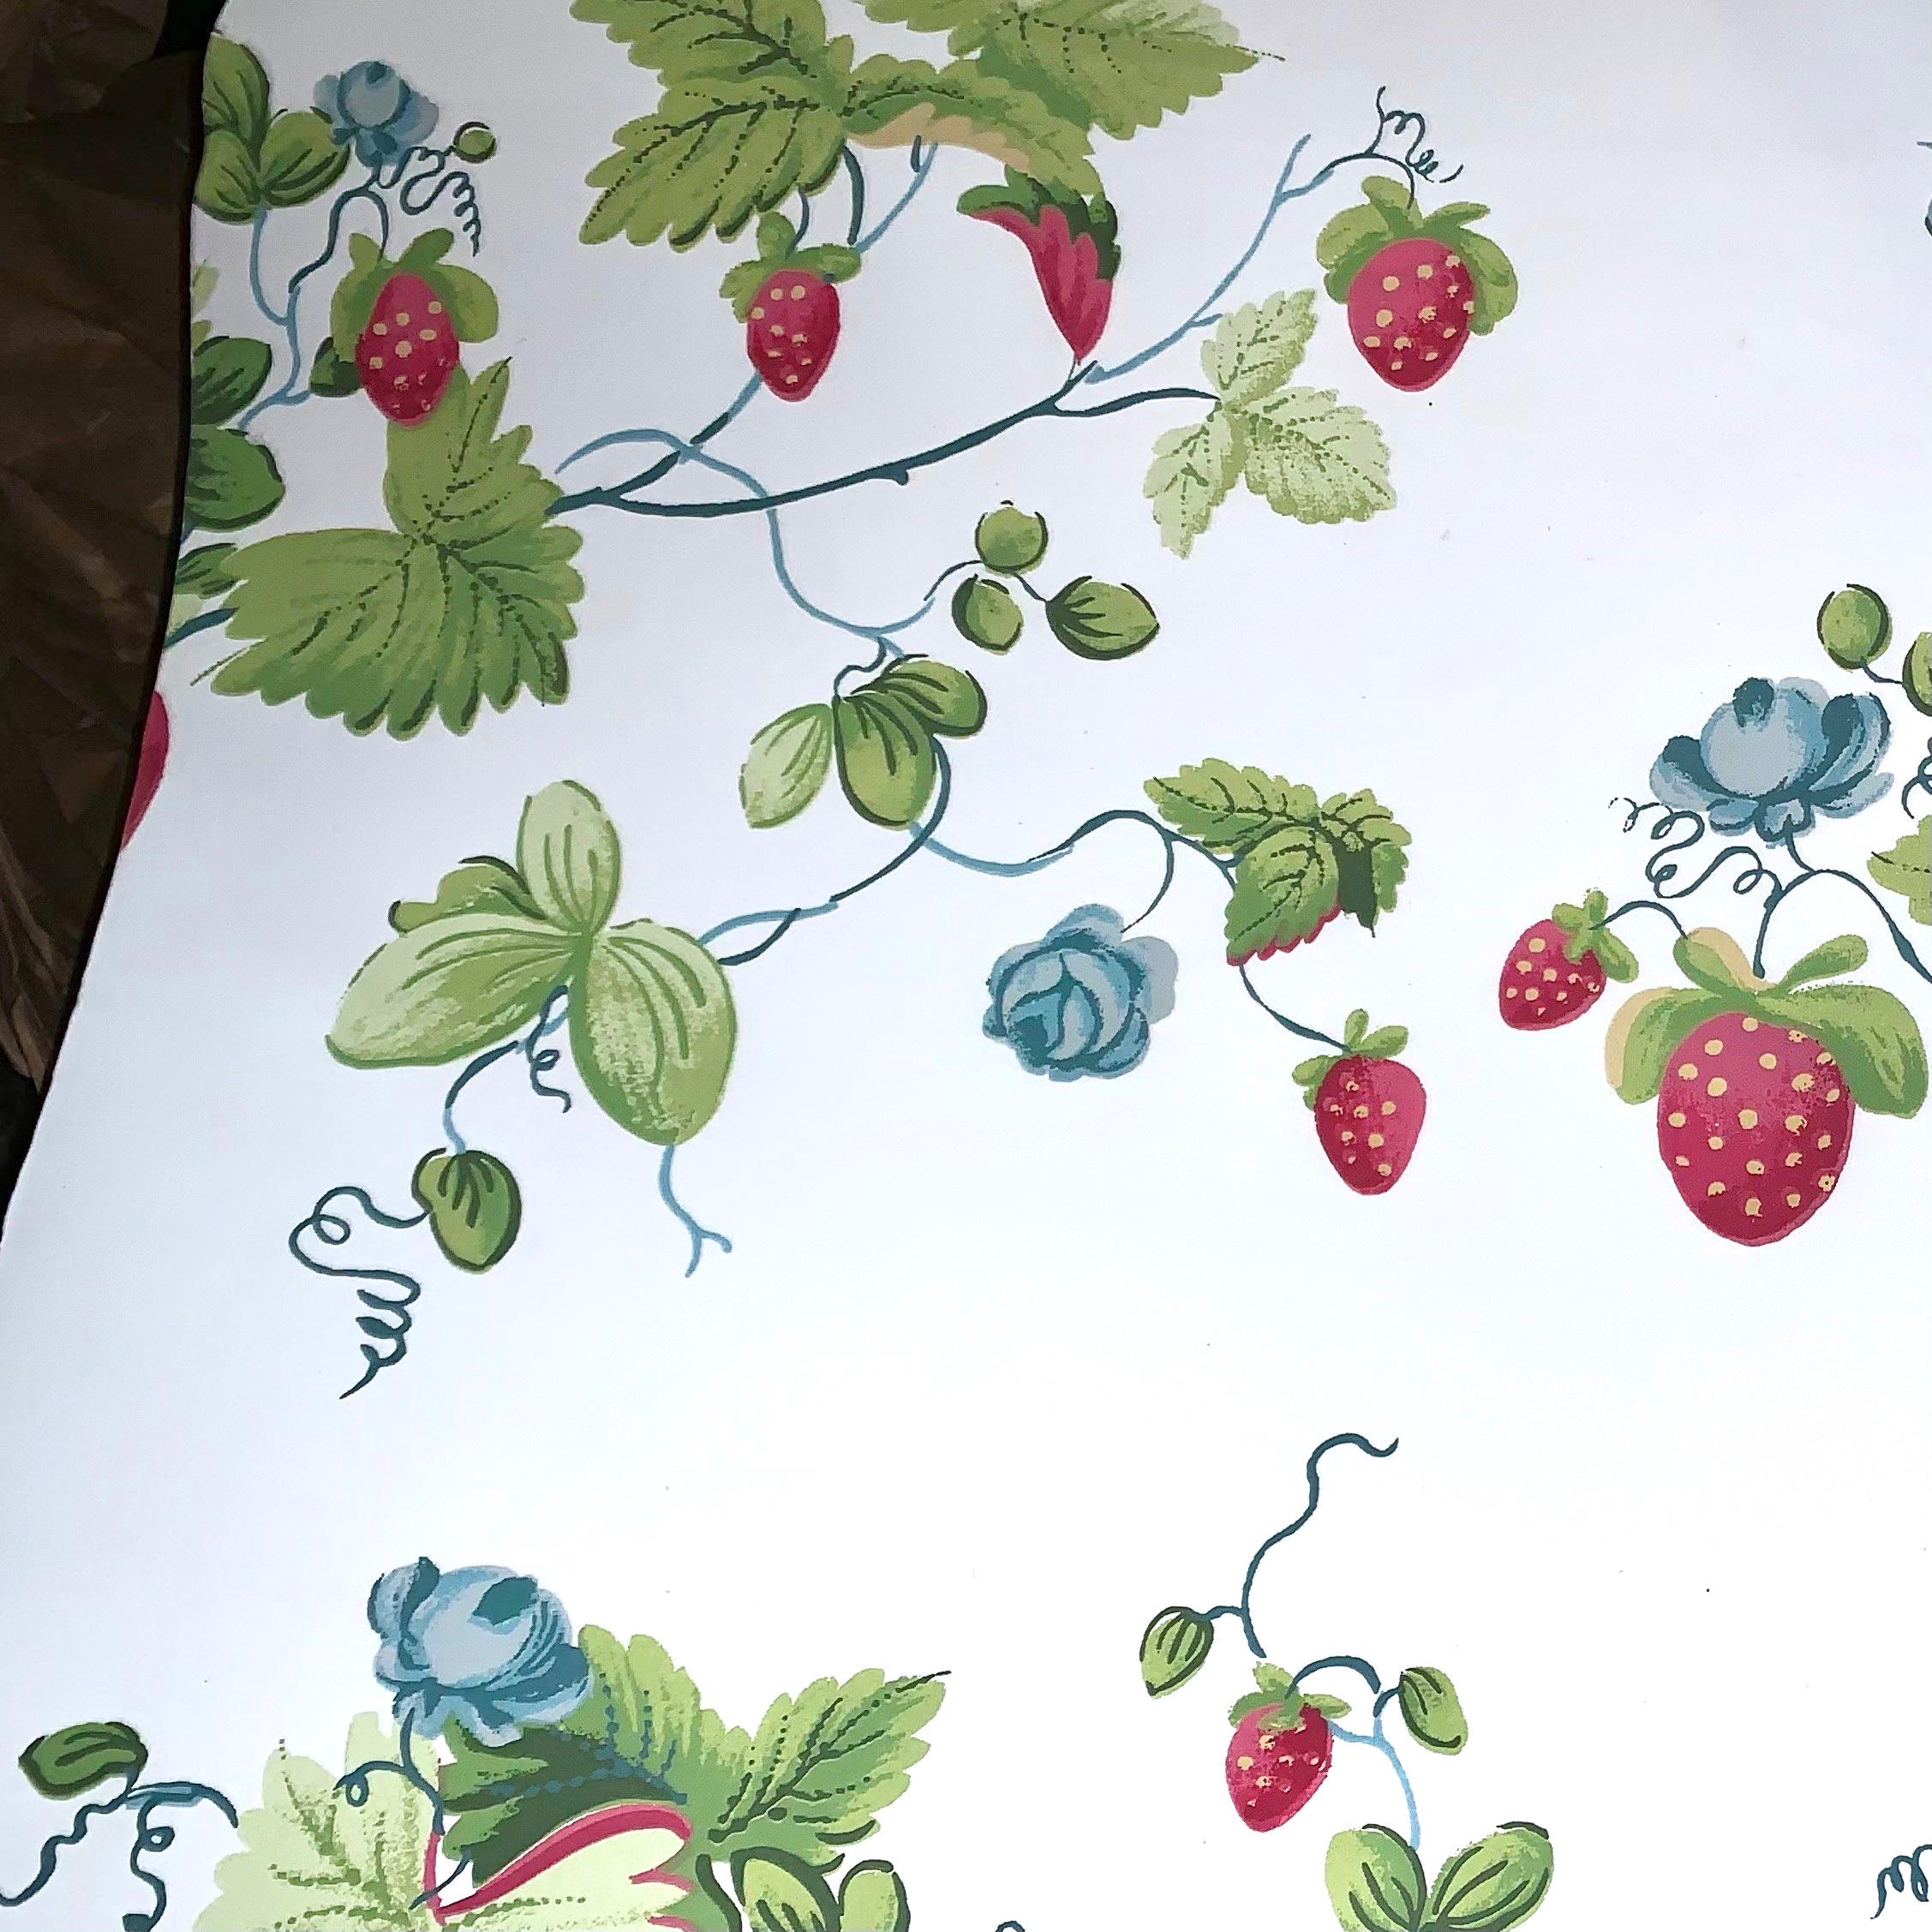 Brunschwig & Fils Historic Deerfield Massachusetts Berries A La Mode wallpaper. Rare hand-printed strawberry on the vine paper from the Historic Deerfield Collection. Listing includes three whole triple rolls, unopened, and one opened triple roll